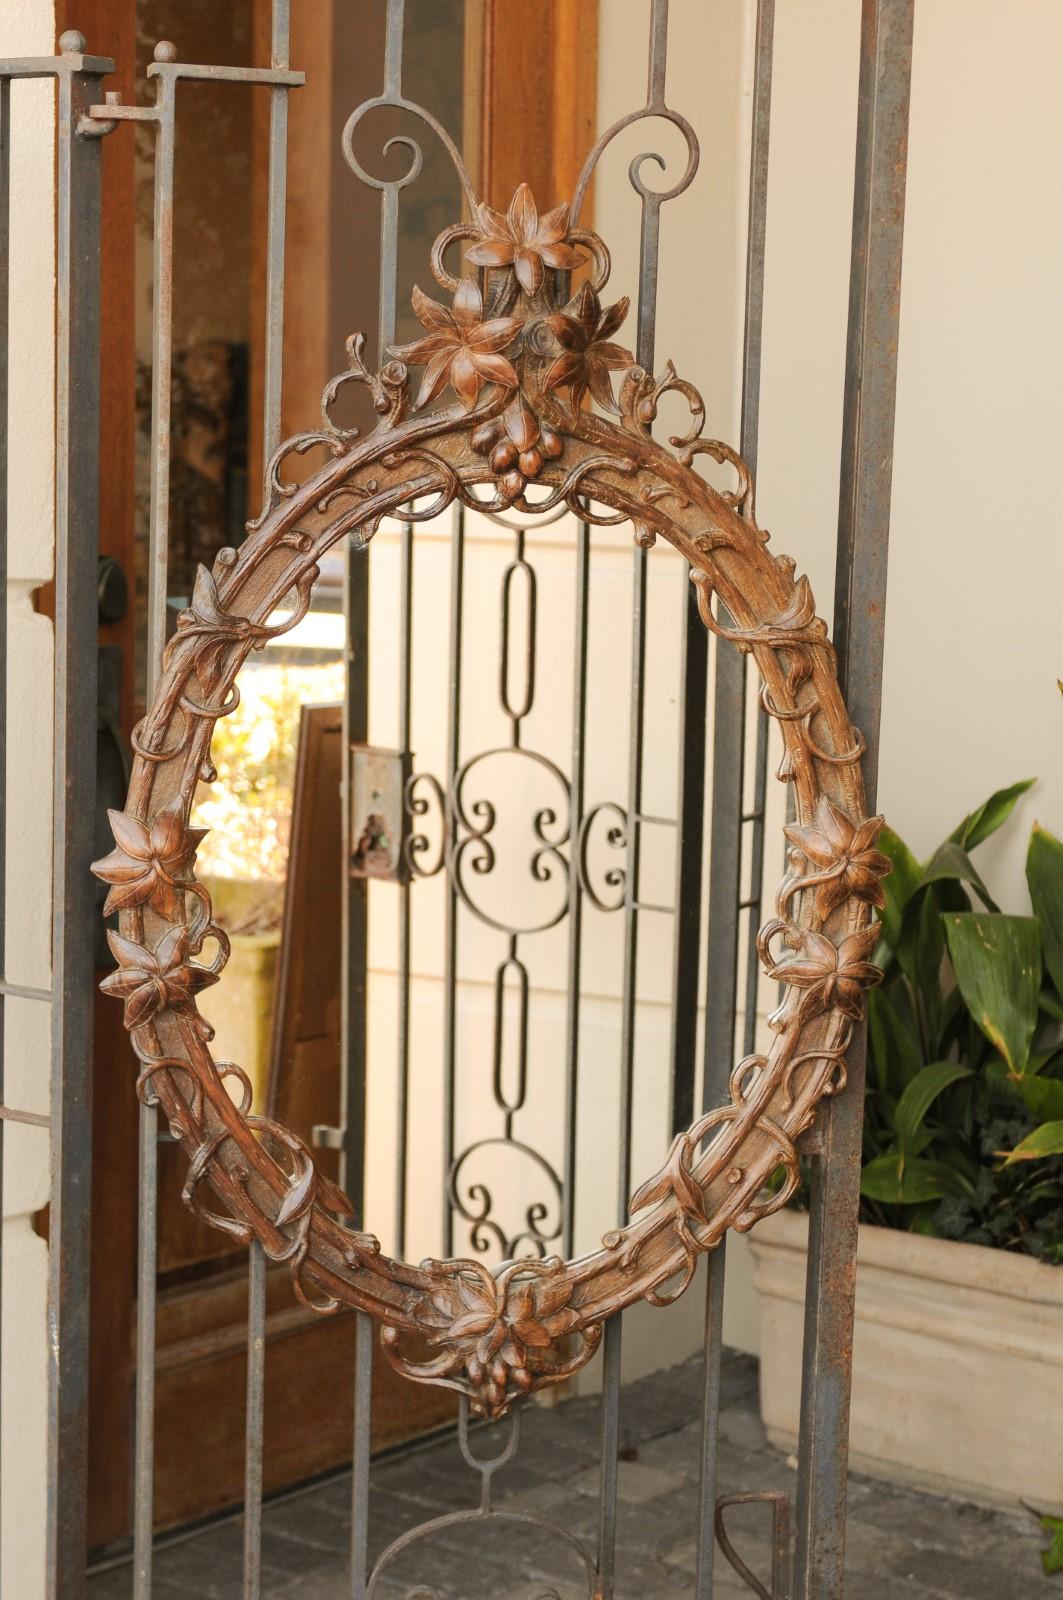 A Black Forest hand carved oak wall mirror from the early 20th century, with edelweiss flower decor. Born in the early 1900s, this exquisite oval wall mirror features an intricate frame, hand carved with delicate edelweiss flowers surrounded by